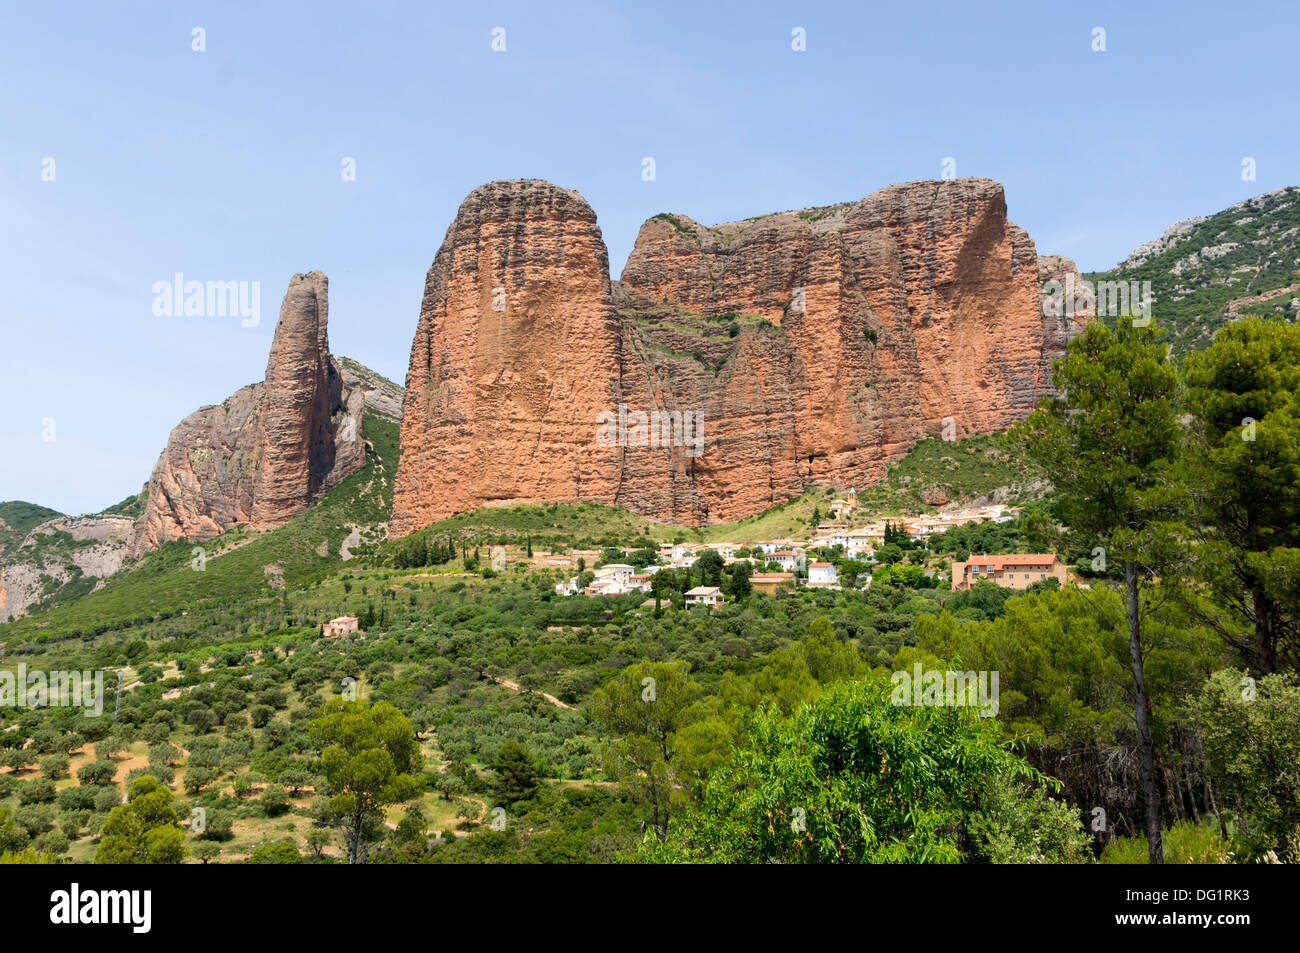 North-West Spain - Riglos, near Huesca. The village nestles below the huge sandstone butte called the Mallos de Riglos. Stock Photo